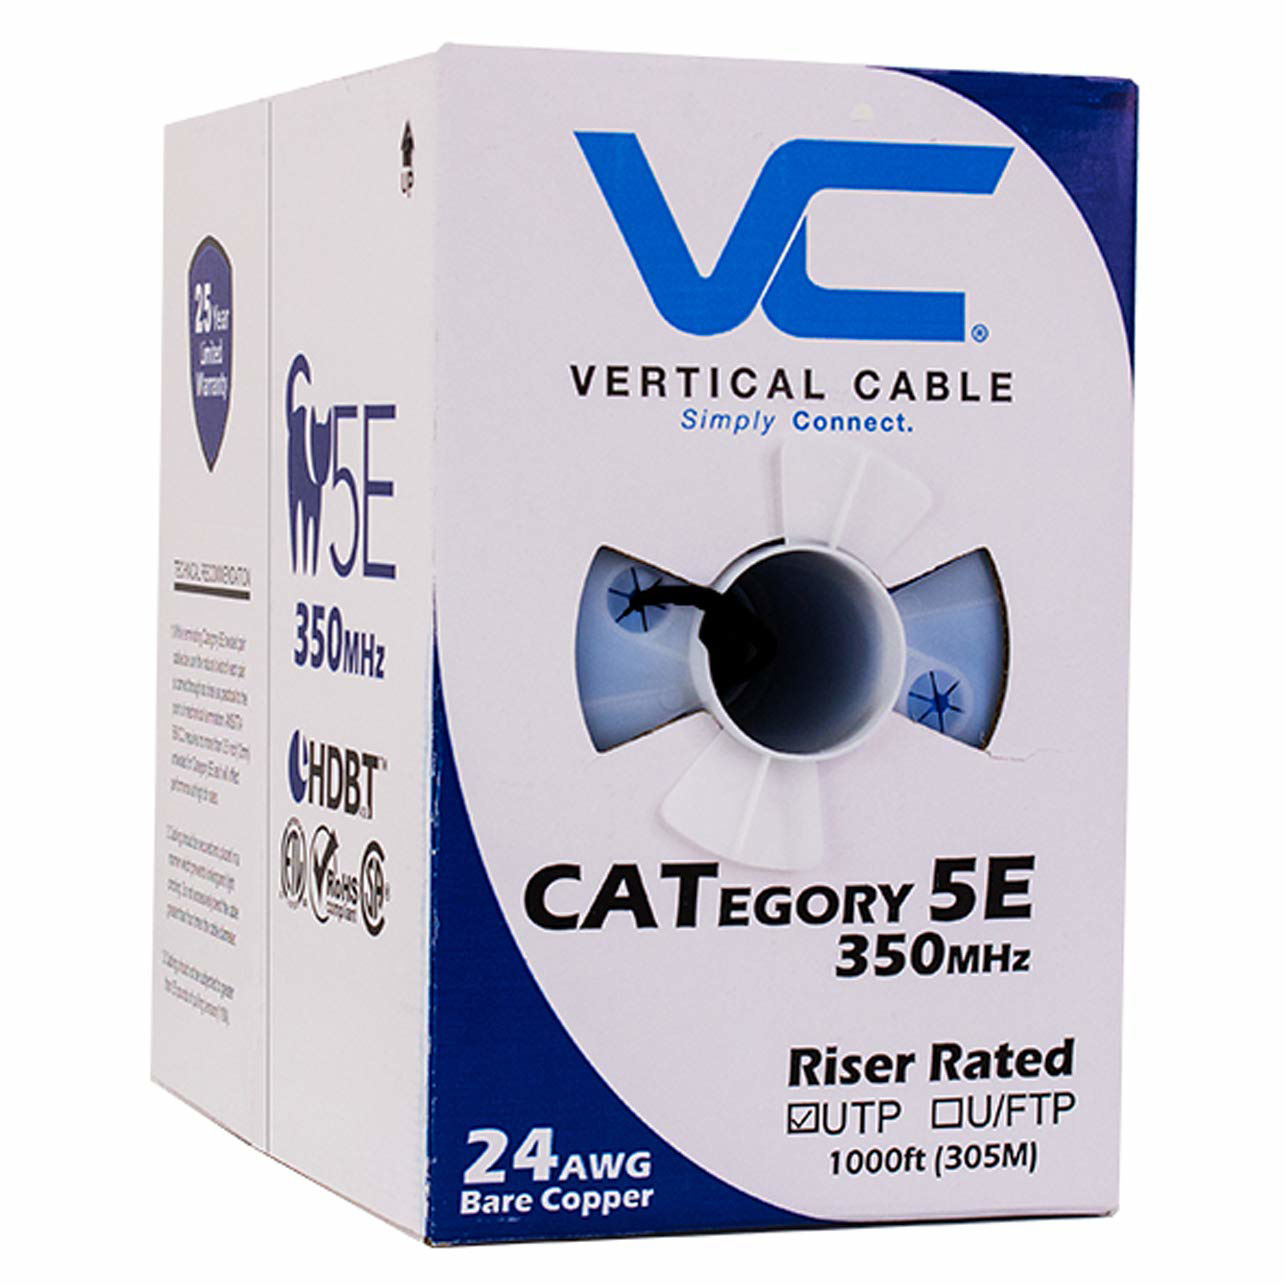 Vertical Cable Cat5e, 350 MHz, UTP, 24AWG, 8C Solid Bare Copper, 1000ft, Black,